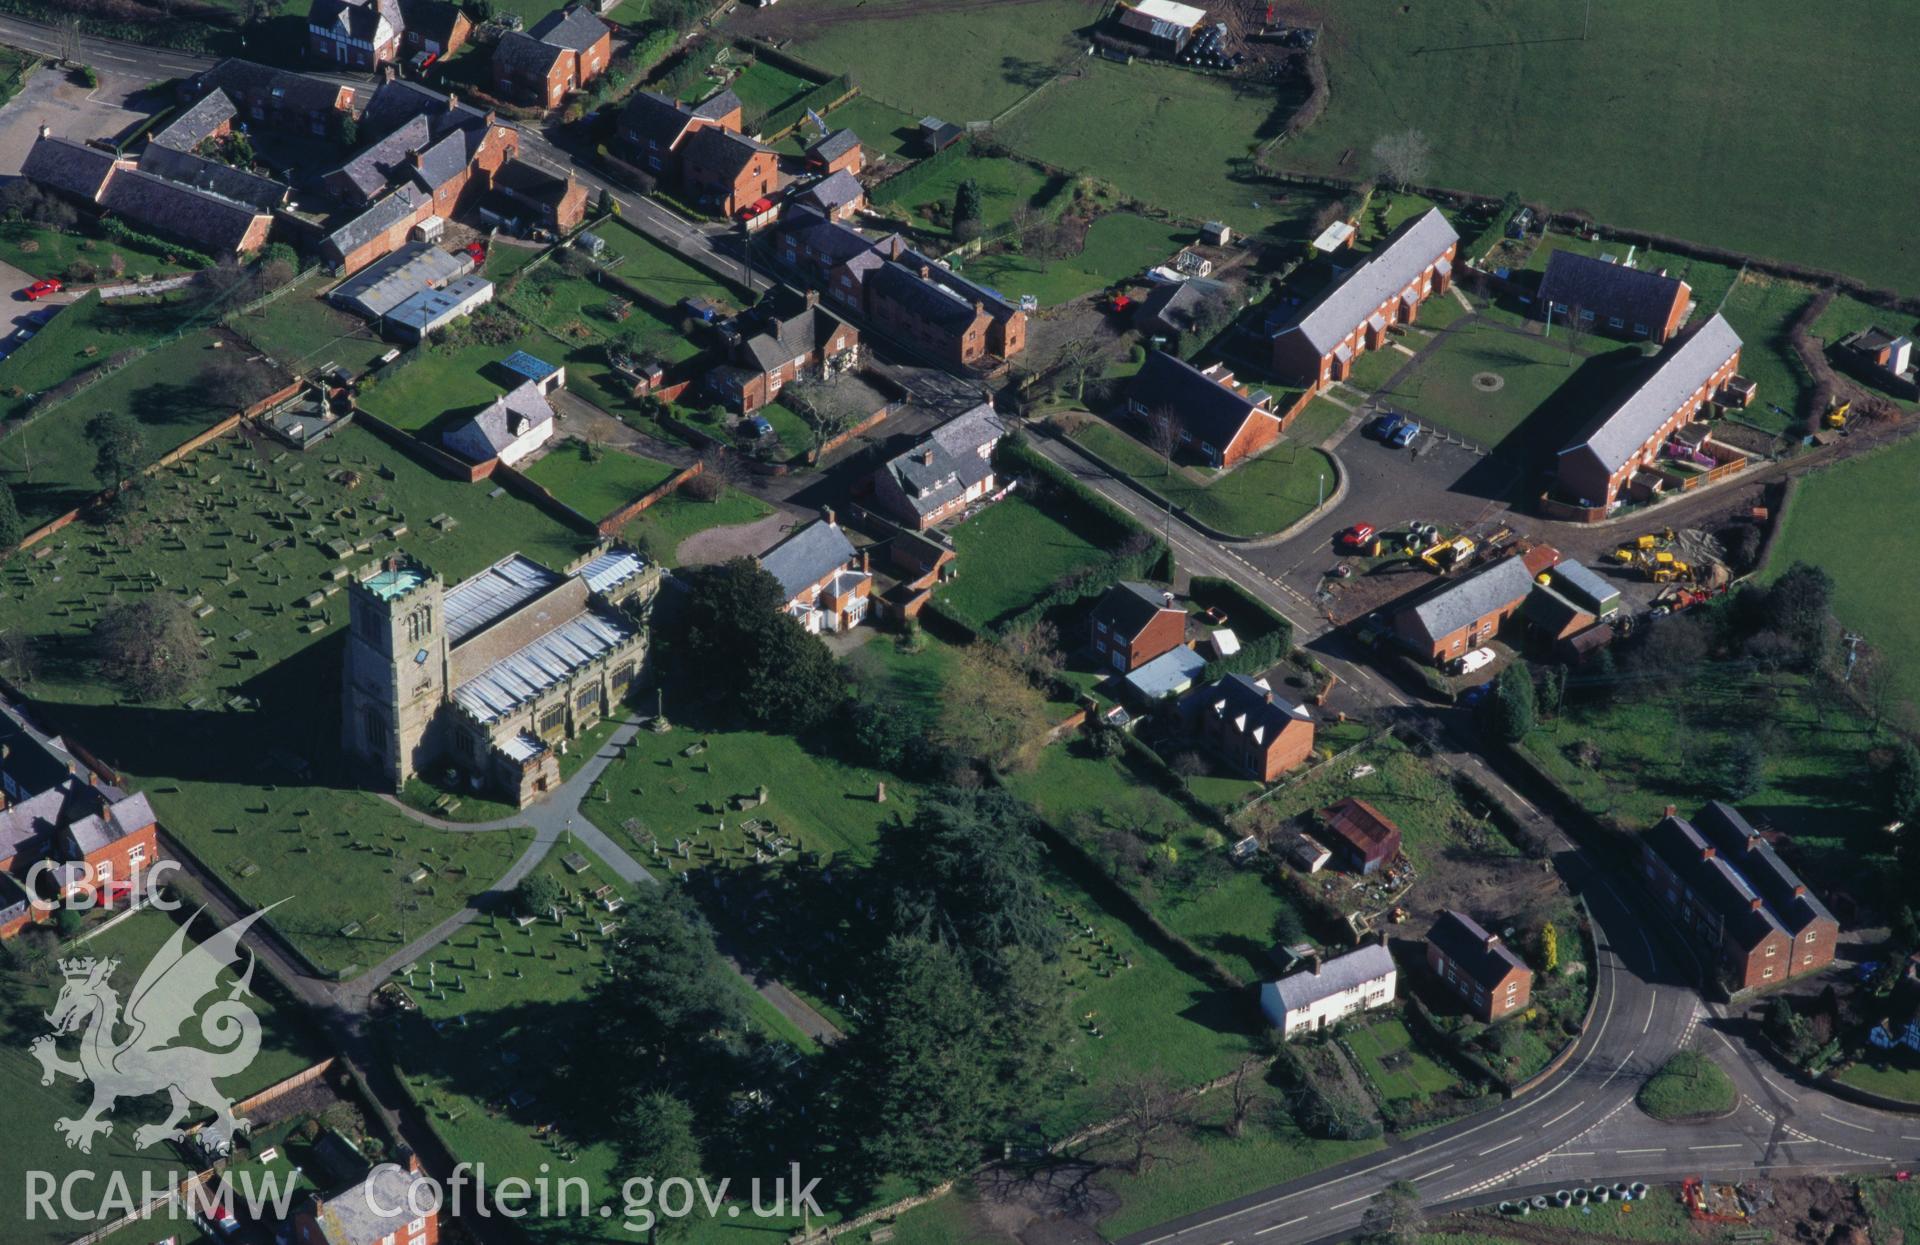 RCAHMW colour oblique aerial photograph of Hanmer taken on 12/03/1995 by C.R. Musson